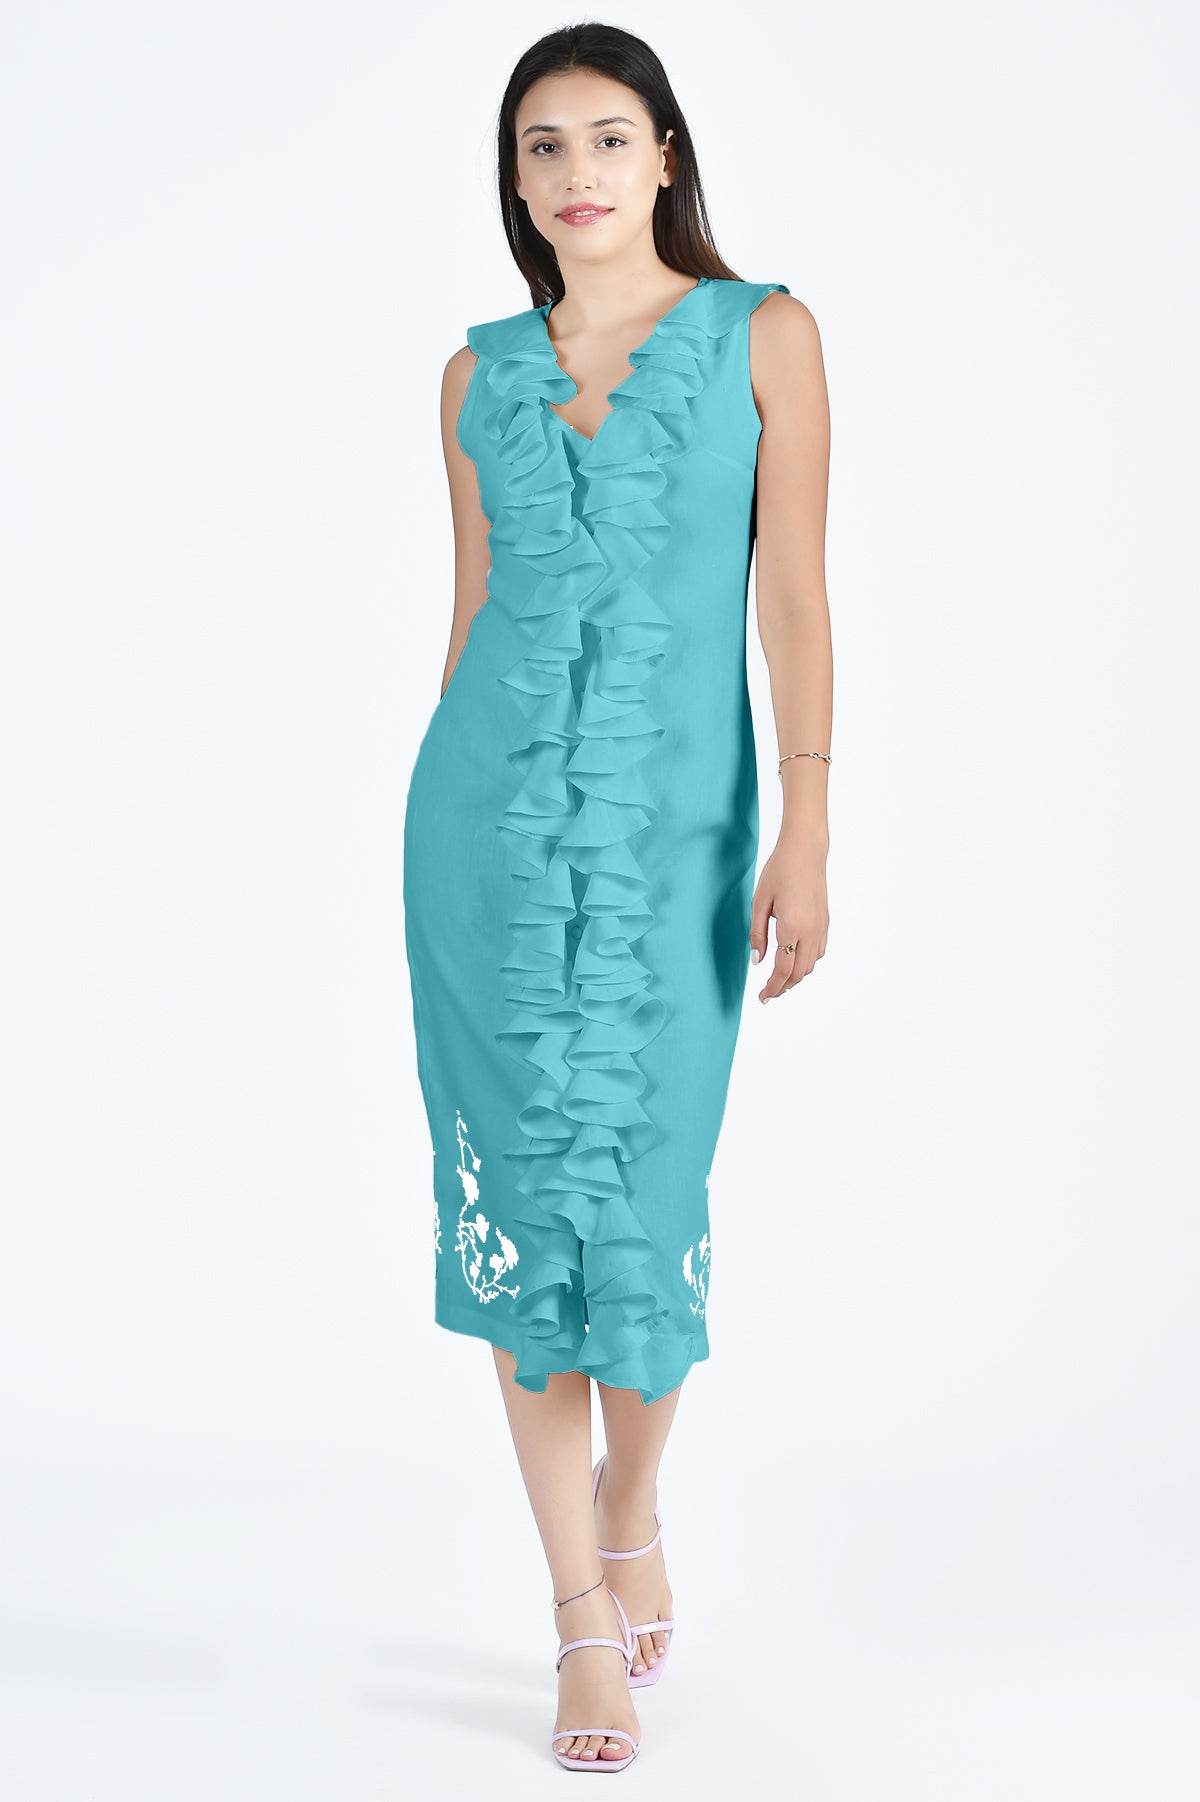 Fanm Mon Belinda Dress in Teal with Ruffle Front and White Floral Embroidery Details 